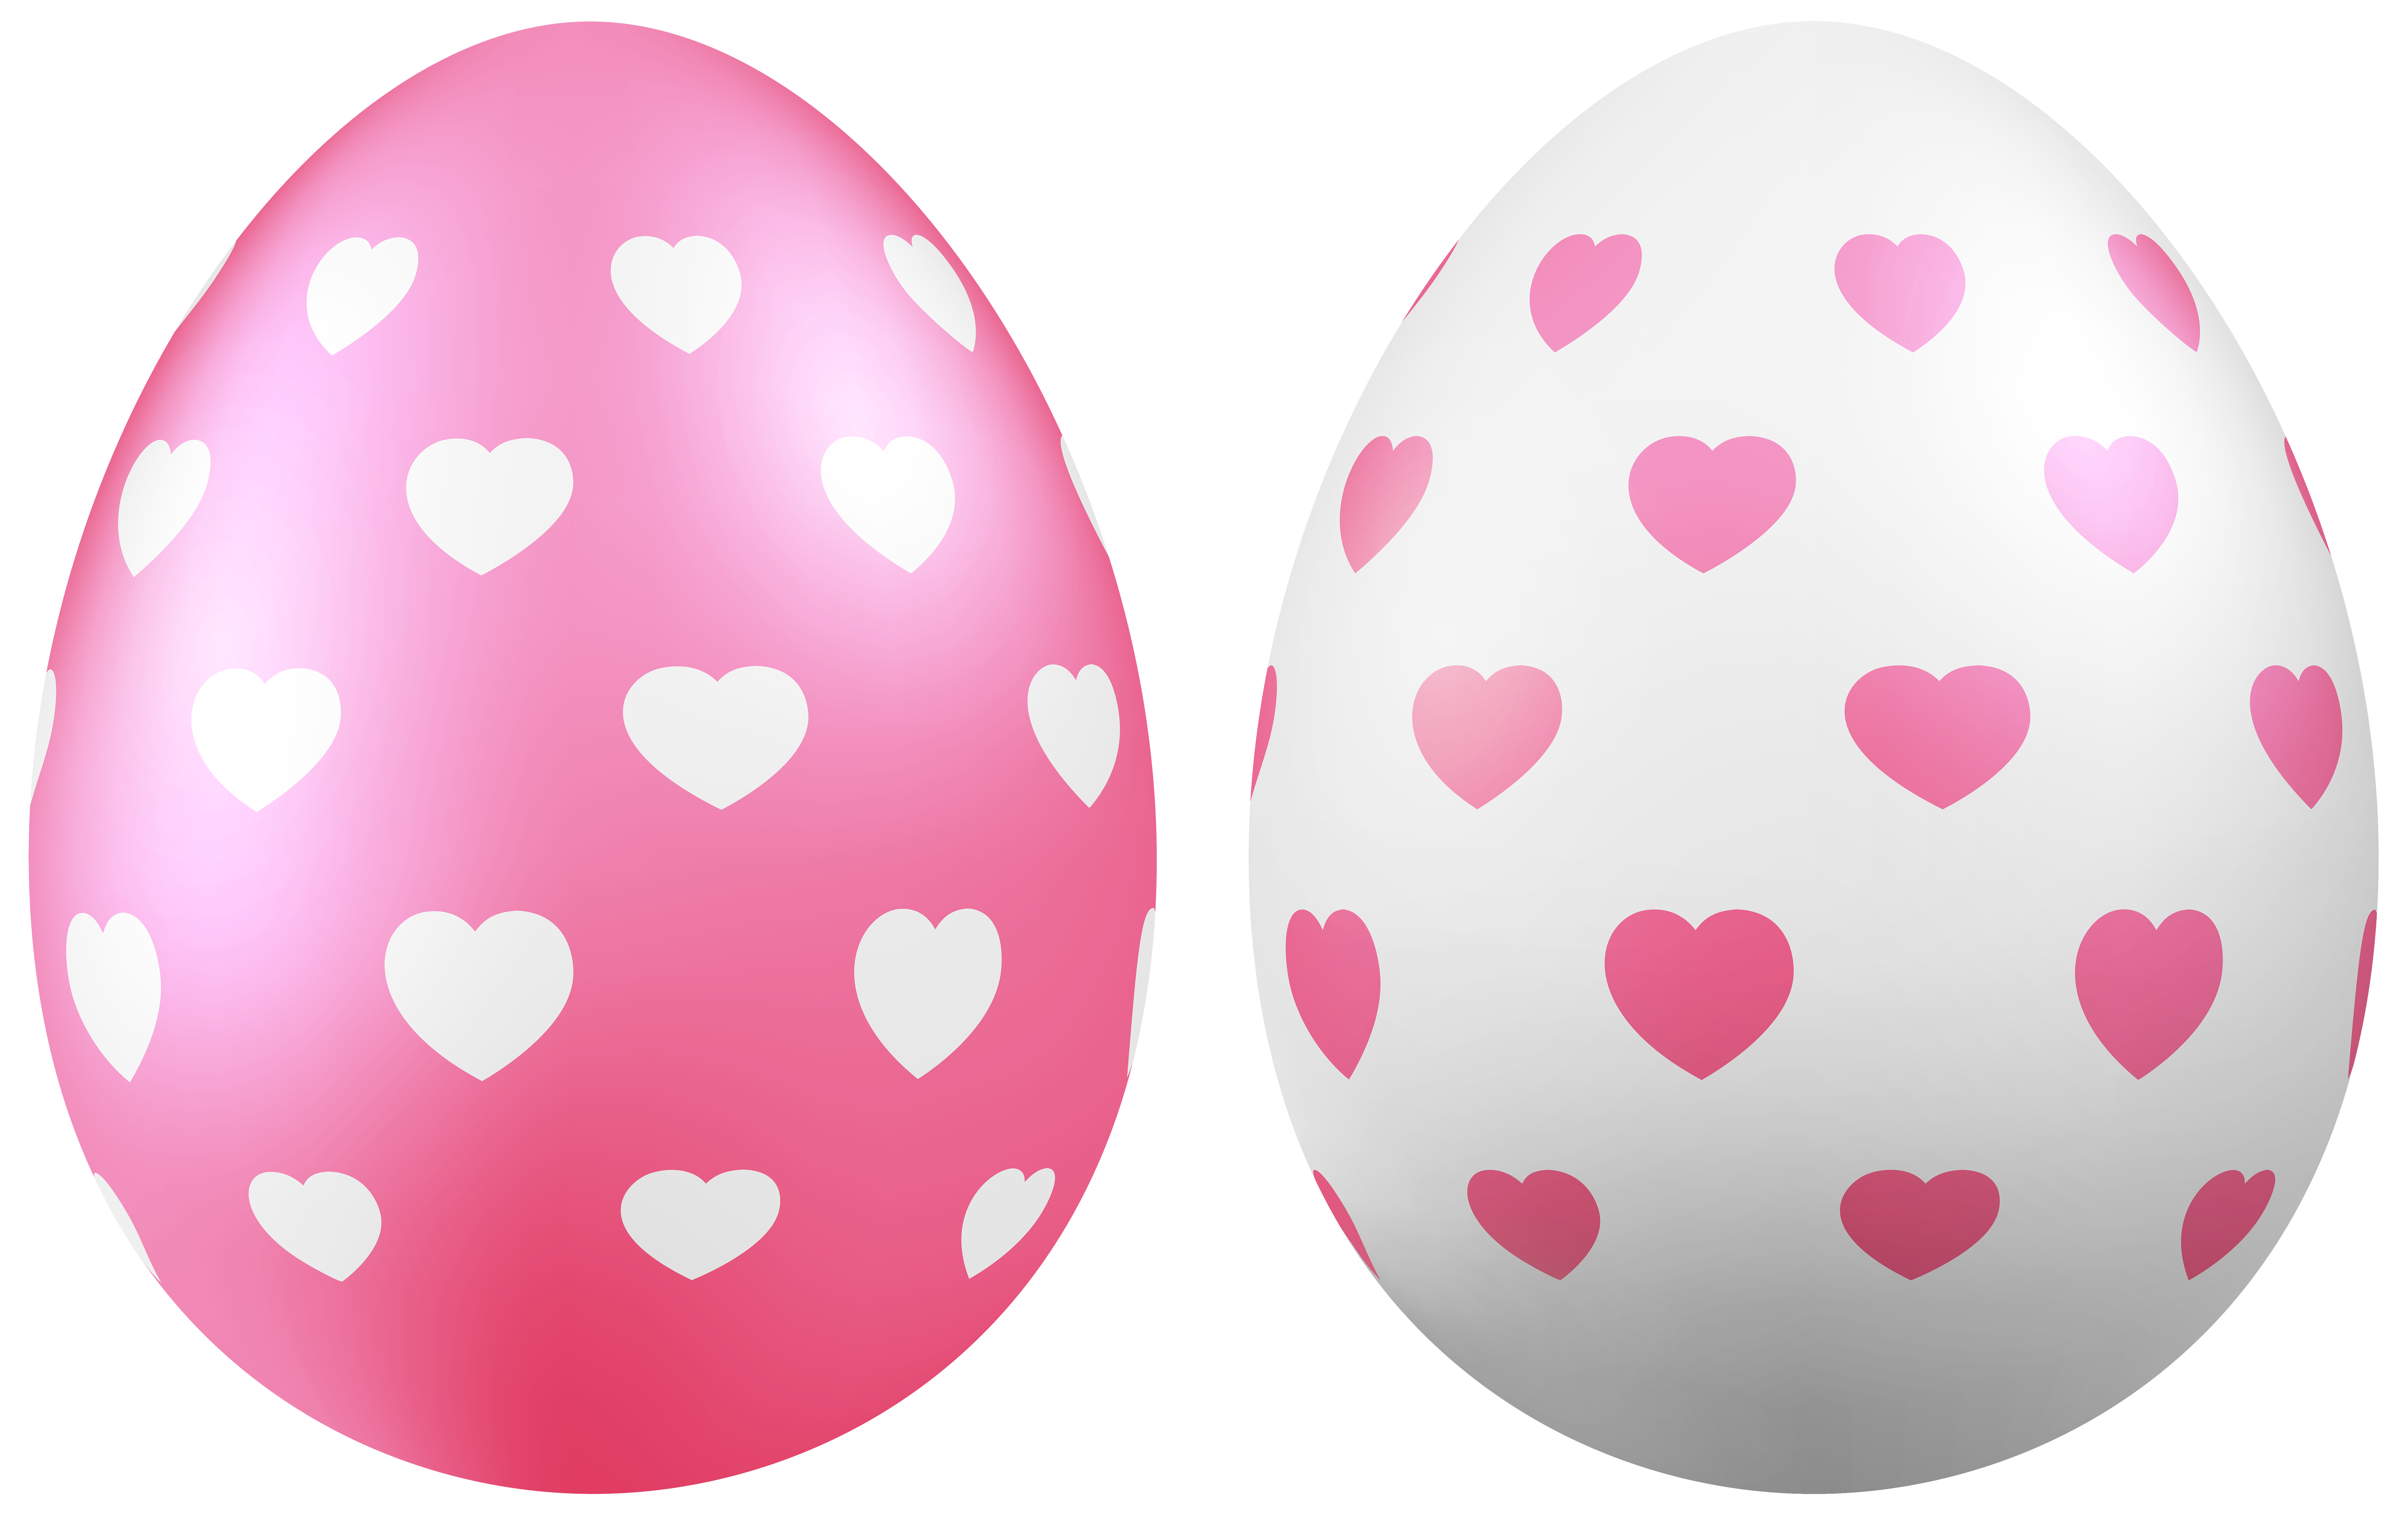 Transparent Easter Eggs Set PNG Clipart Picture​  Gallery Yopriceville -  High-Quality Free Images and Transparent PNG Clipart